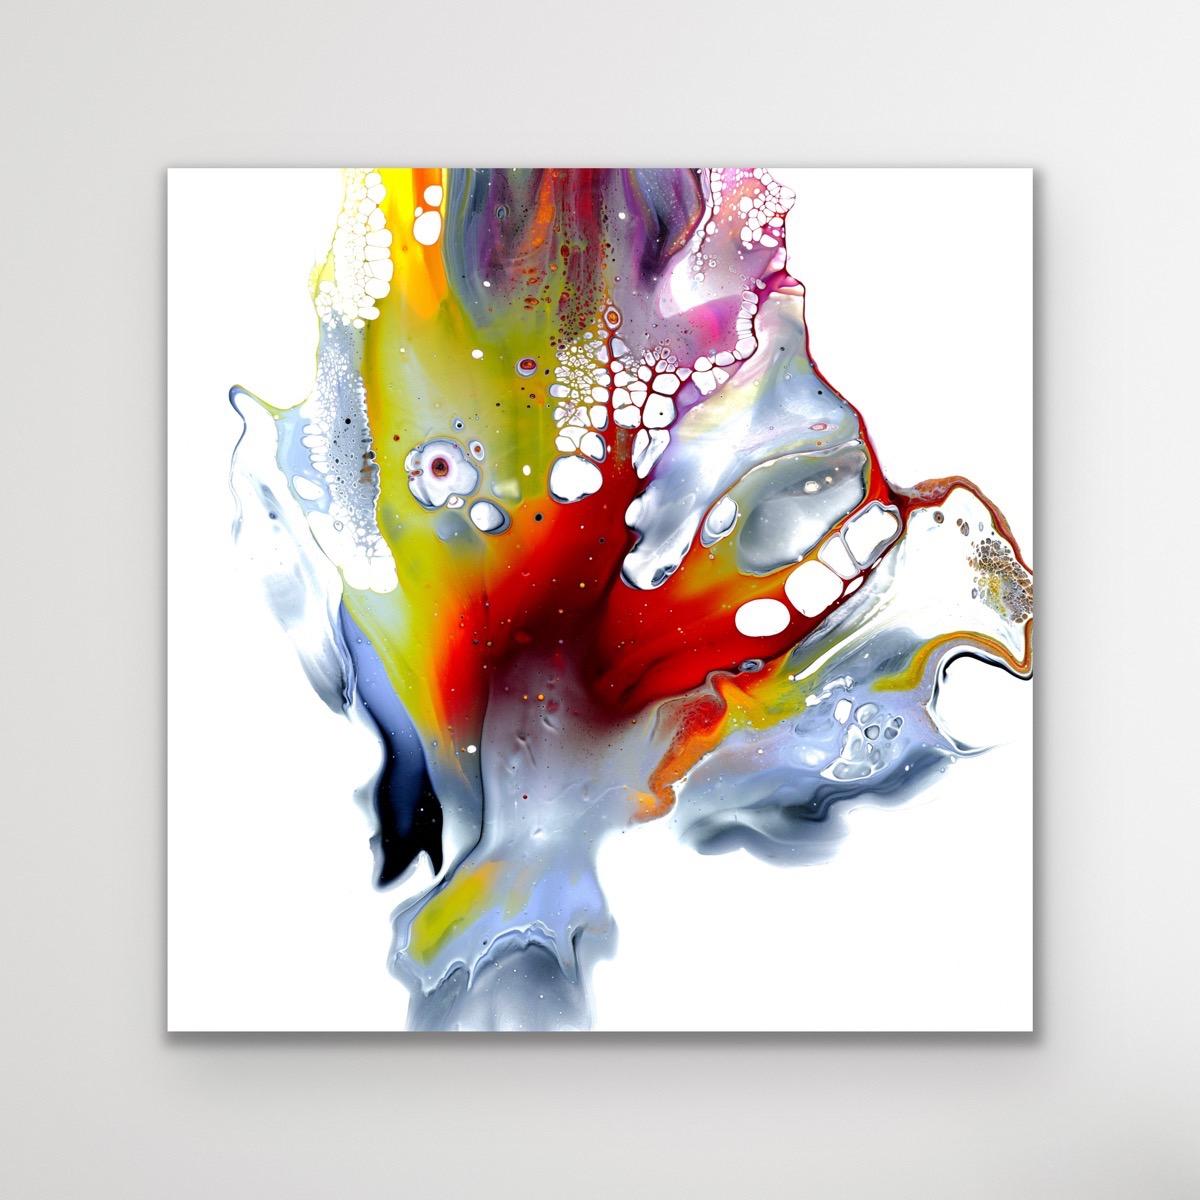 Abstract Contemporary Painting, Large Modern Giclee Print, LE Signed by artist.